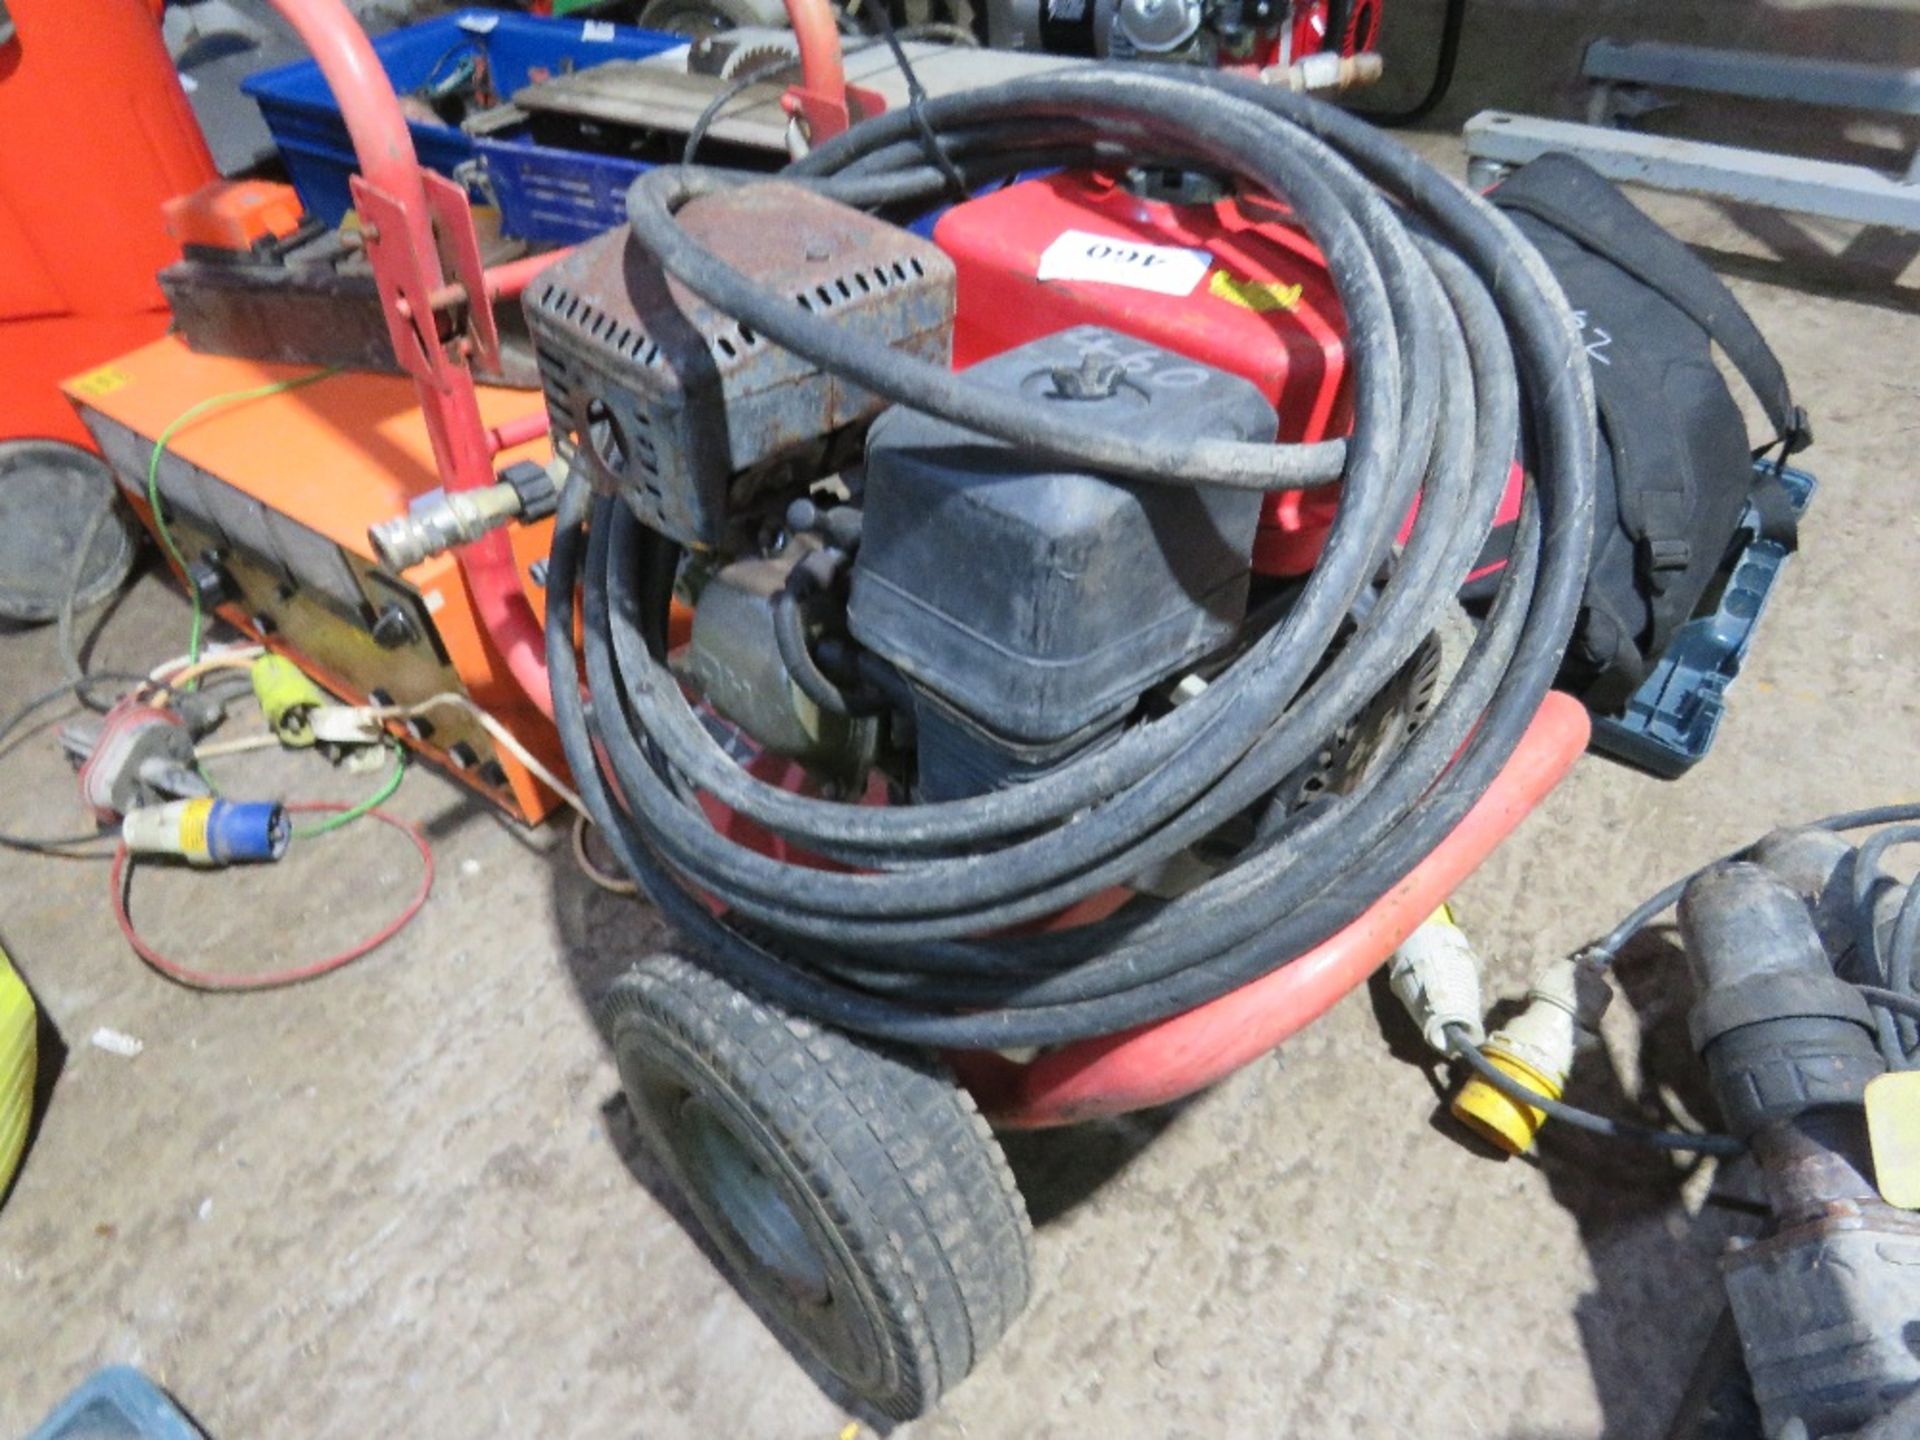 PETROL ENGINED POWER WASHER WITH HOSE, 6.5HP POWERED. SOURCED FROM LOCAL DEPOT CLOSURE.